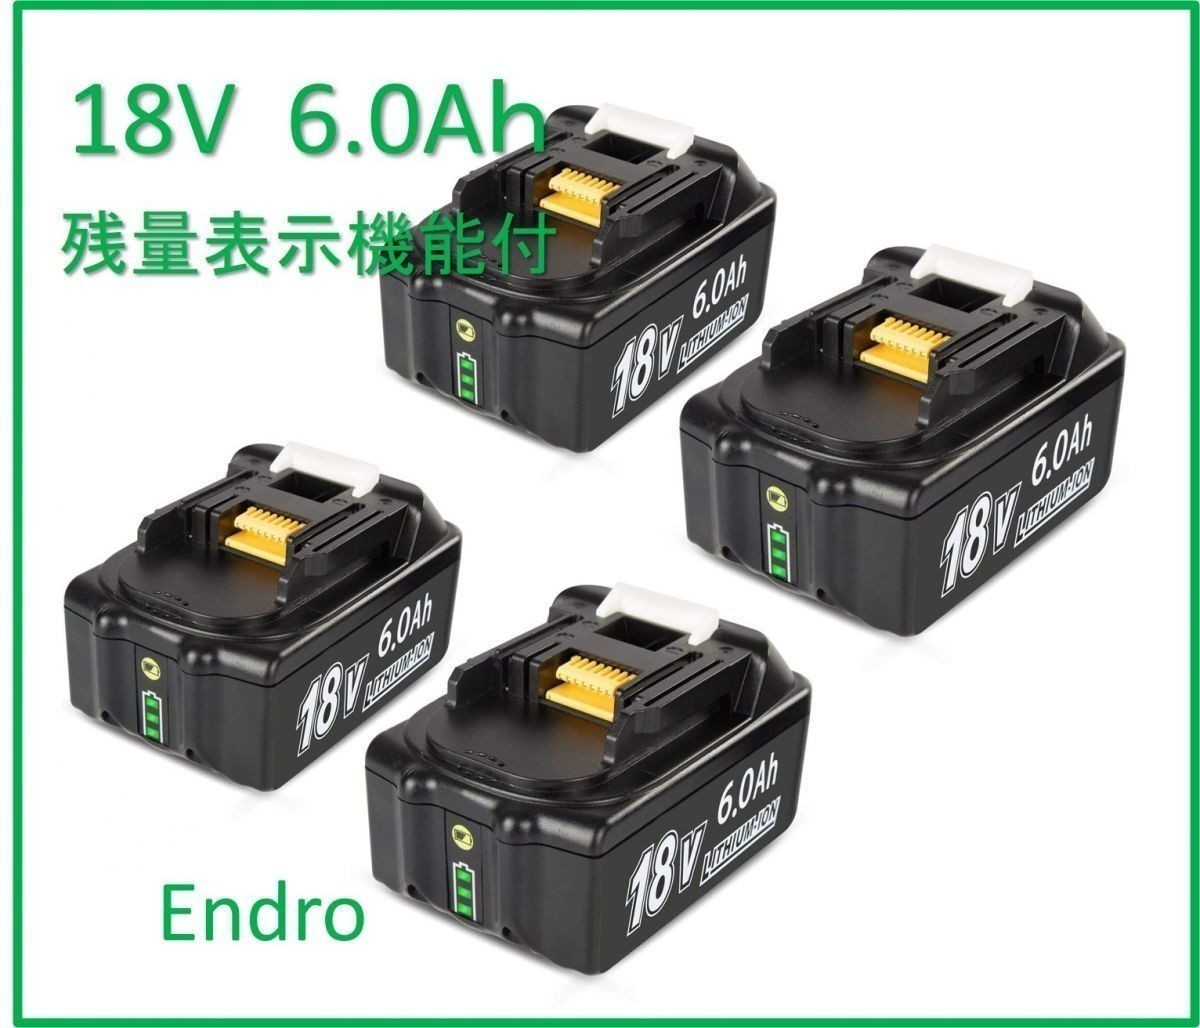 18V BL1860b 残量表示付 マキタ 互換 バッテリー 6.0Ah Endro LED残量